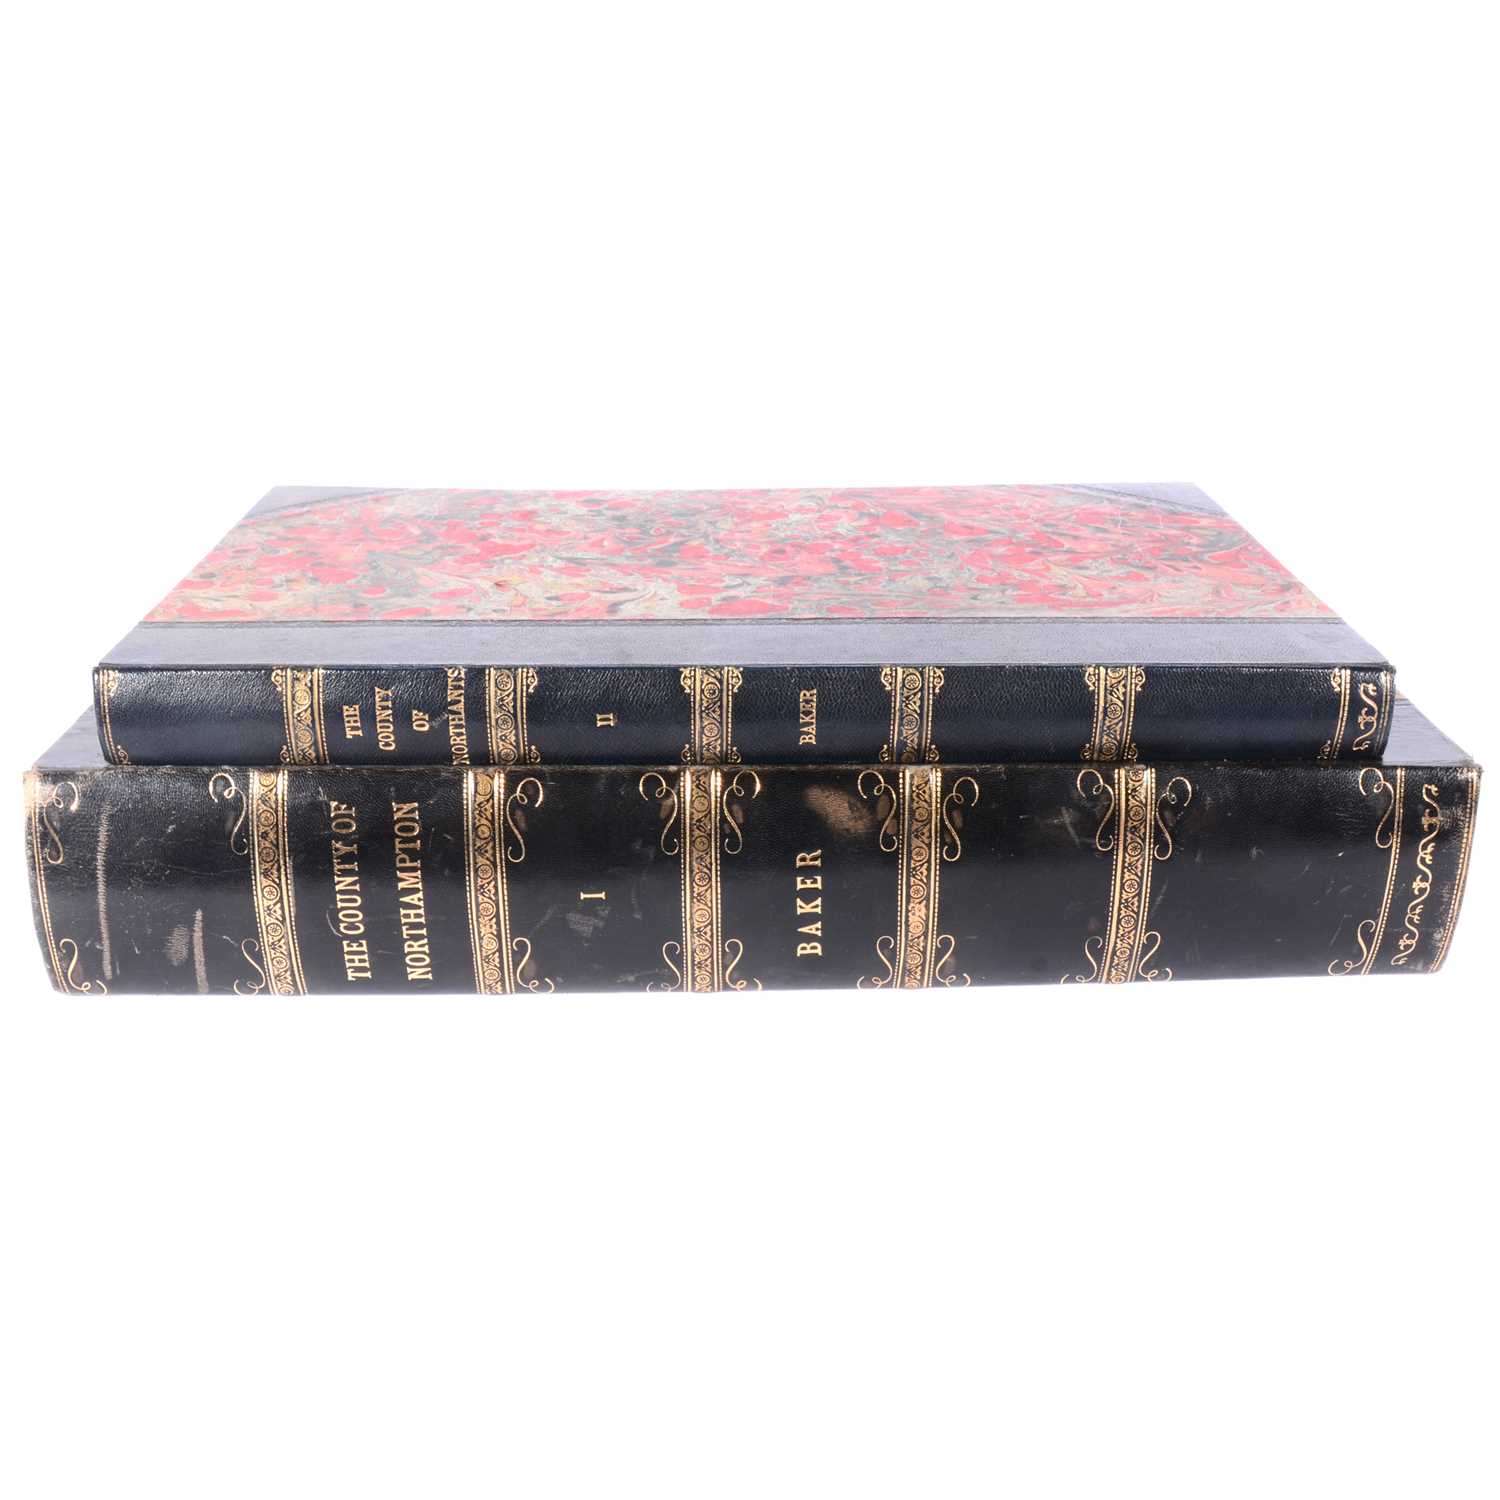 Lot 49 - George Baker, The History and Antiquities of the County of Northampton